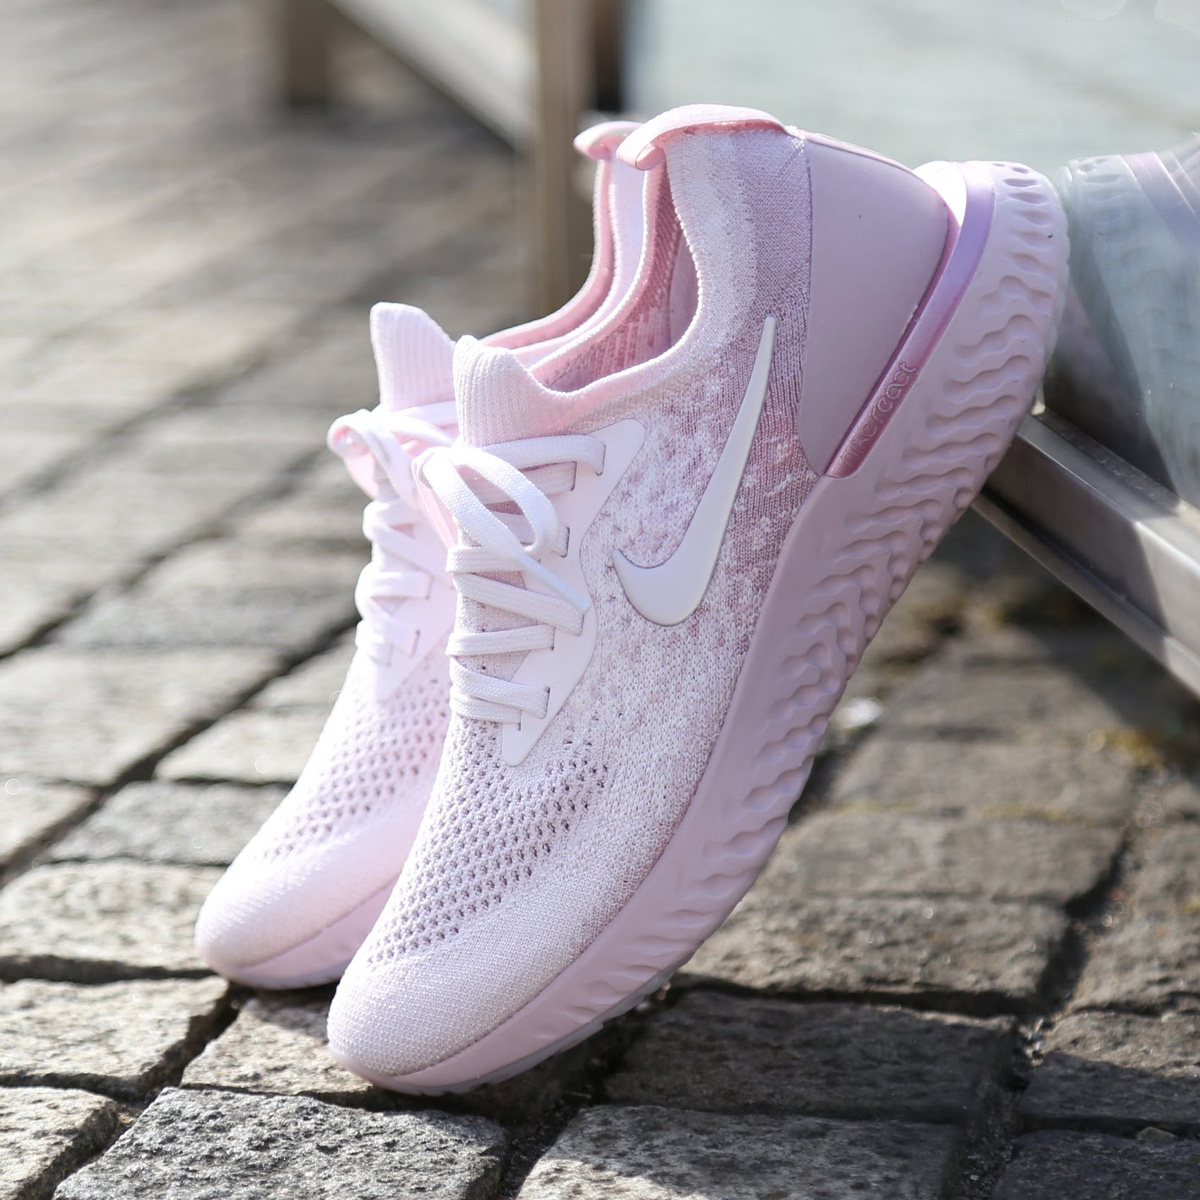 pearl pink epic react